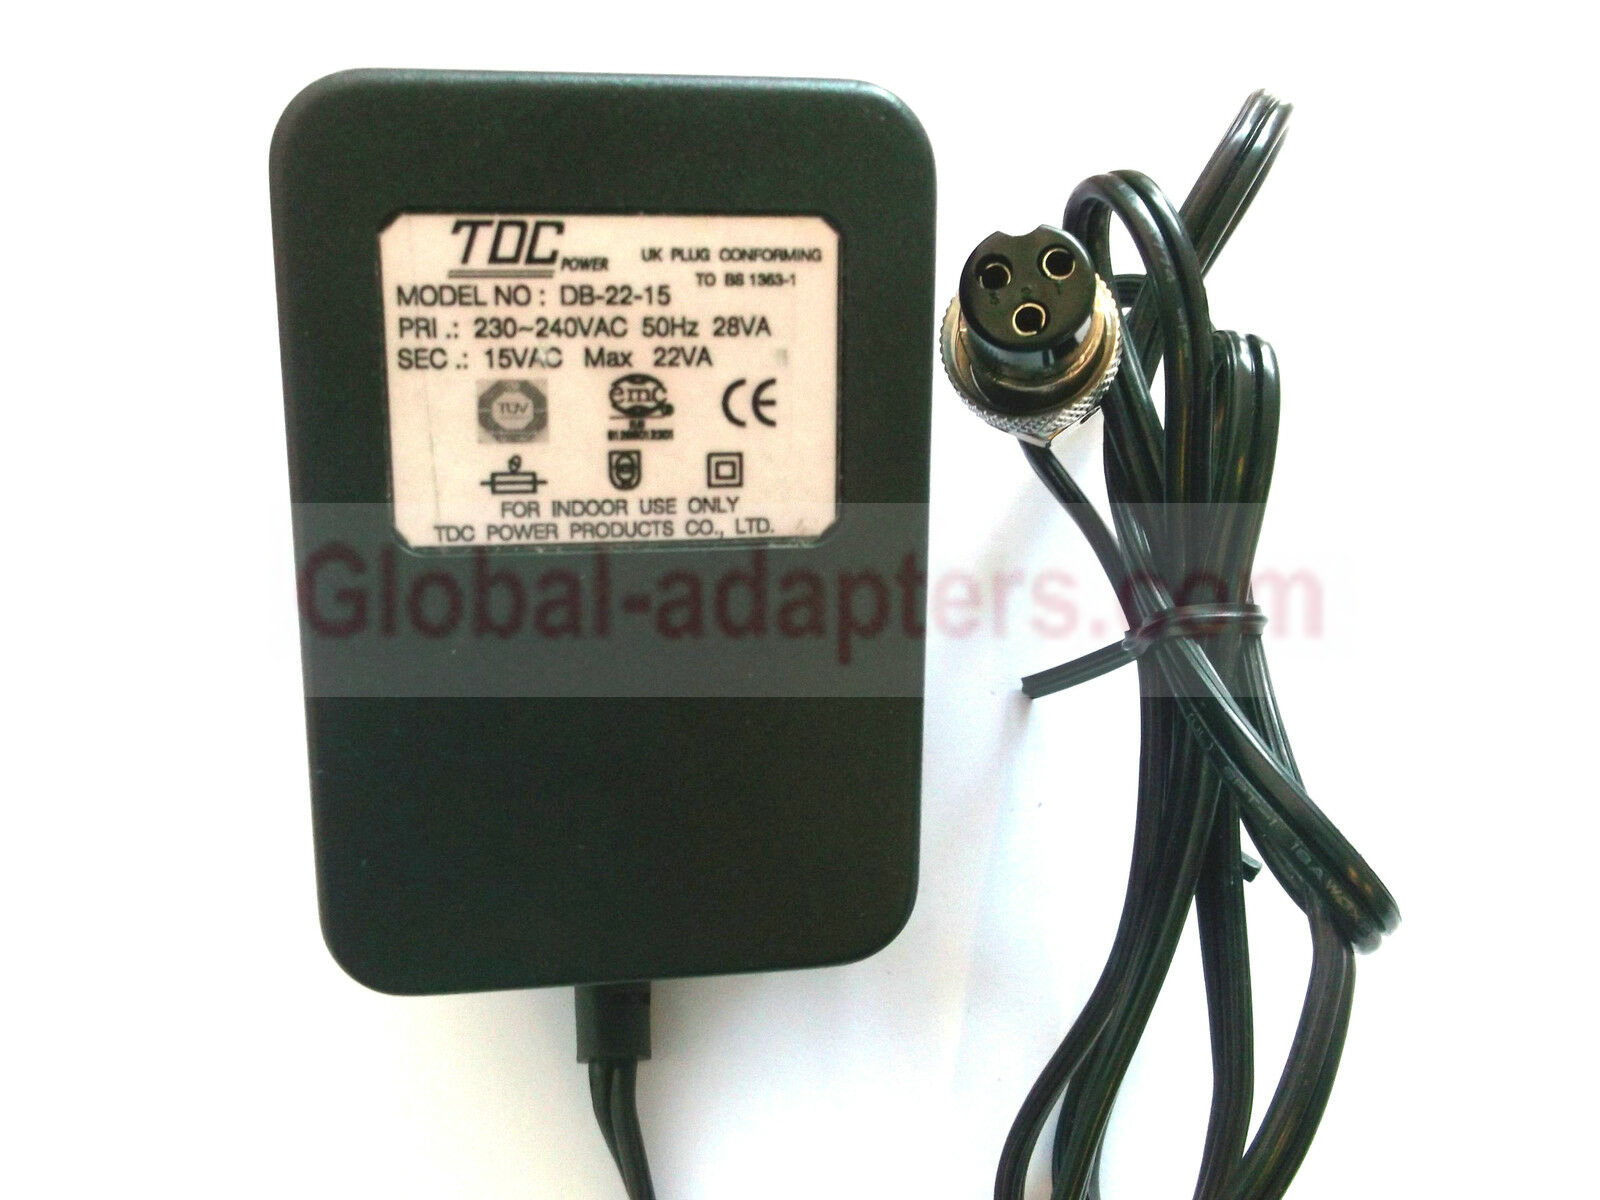 NEW 15V 22A TDC POWER DB-22-15 POWER SUPPLY AC ADAPTER